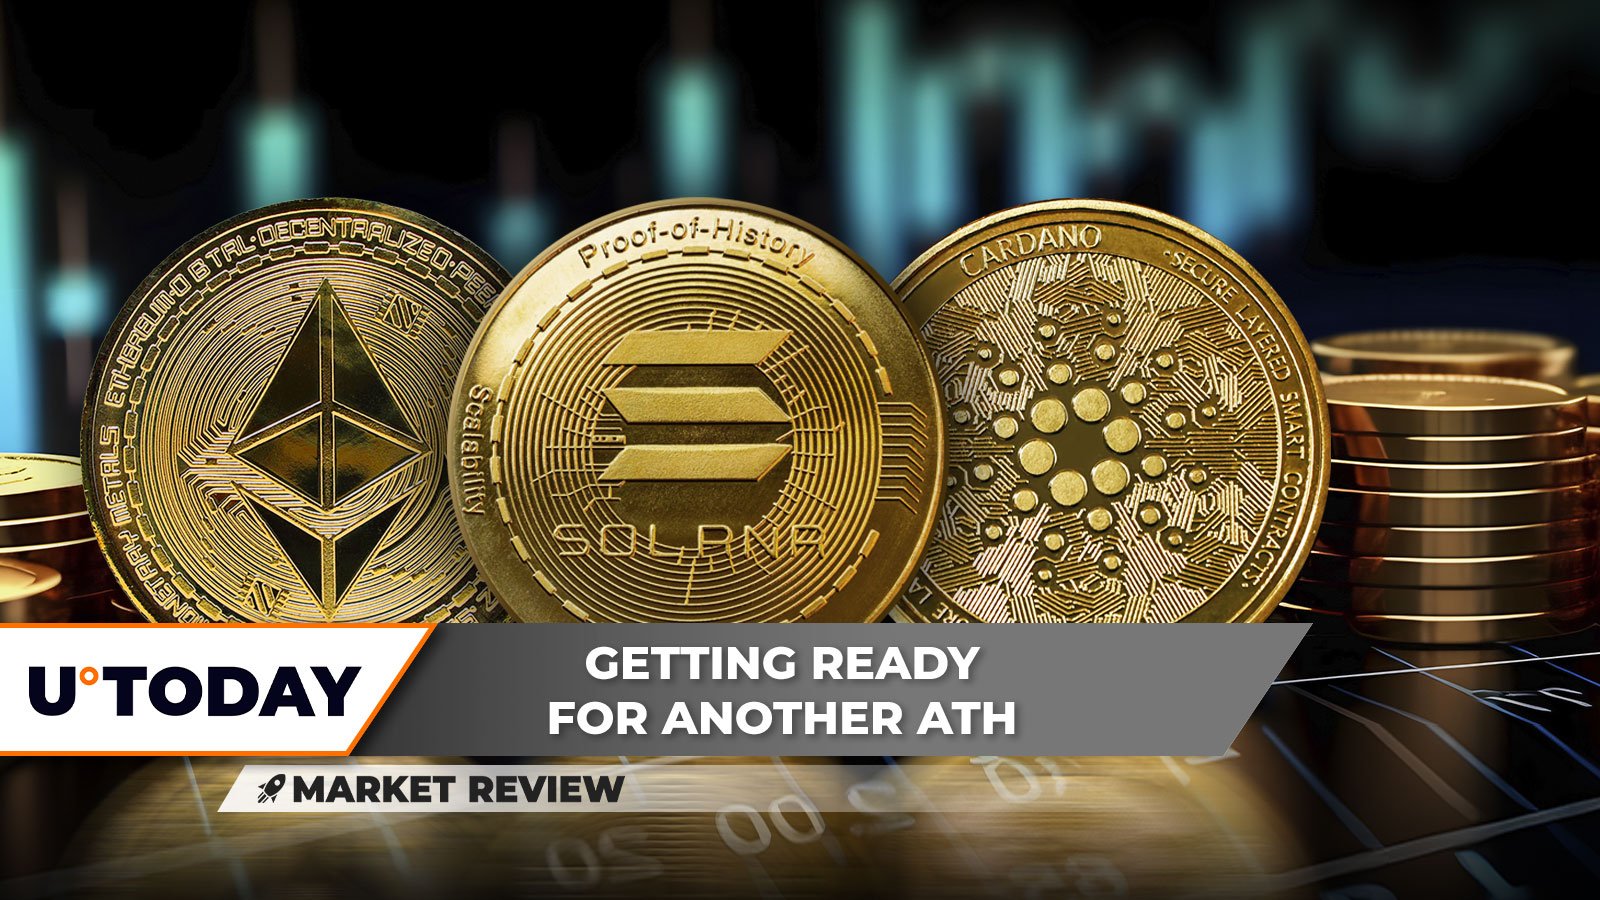 Is Ethereum (ETH) close to reaching ATH?  Solana (SOL) Finally Breaks Through, Will Cardano (ADA) Recover? 